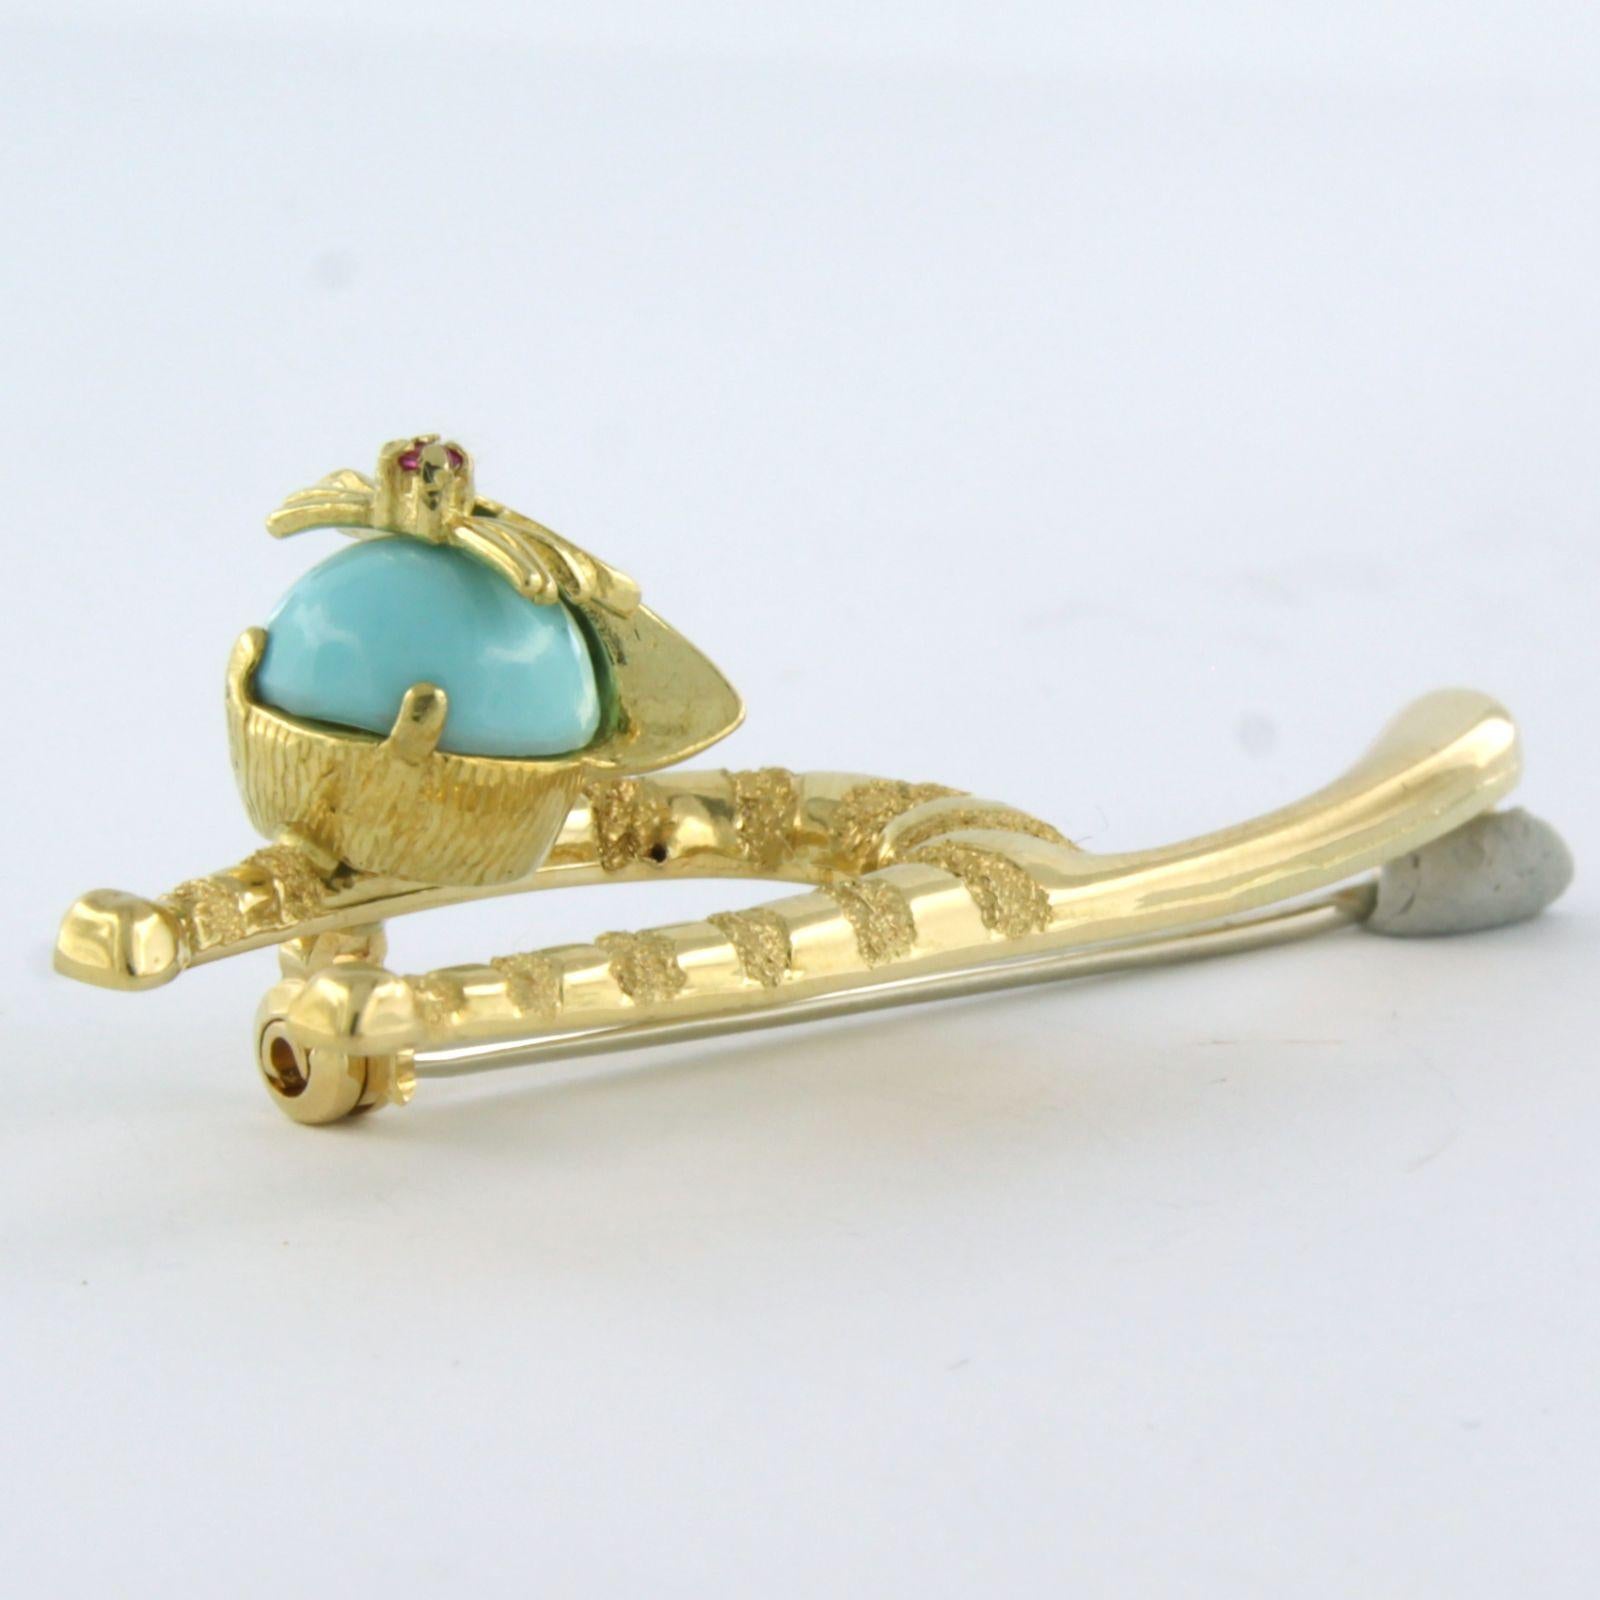 Women's Brooch with Ruby and turquoise in shape of a cat 18k yellow gold